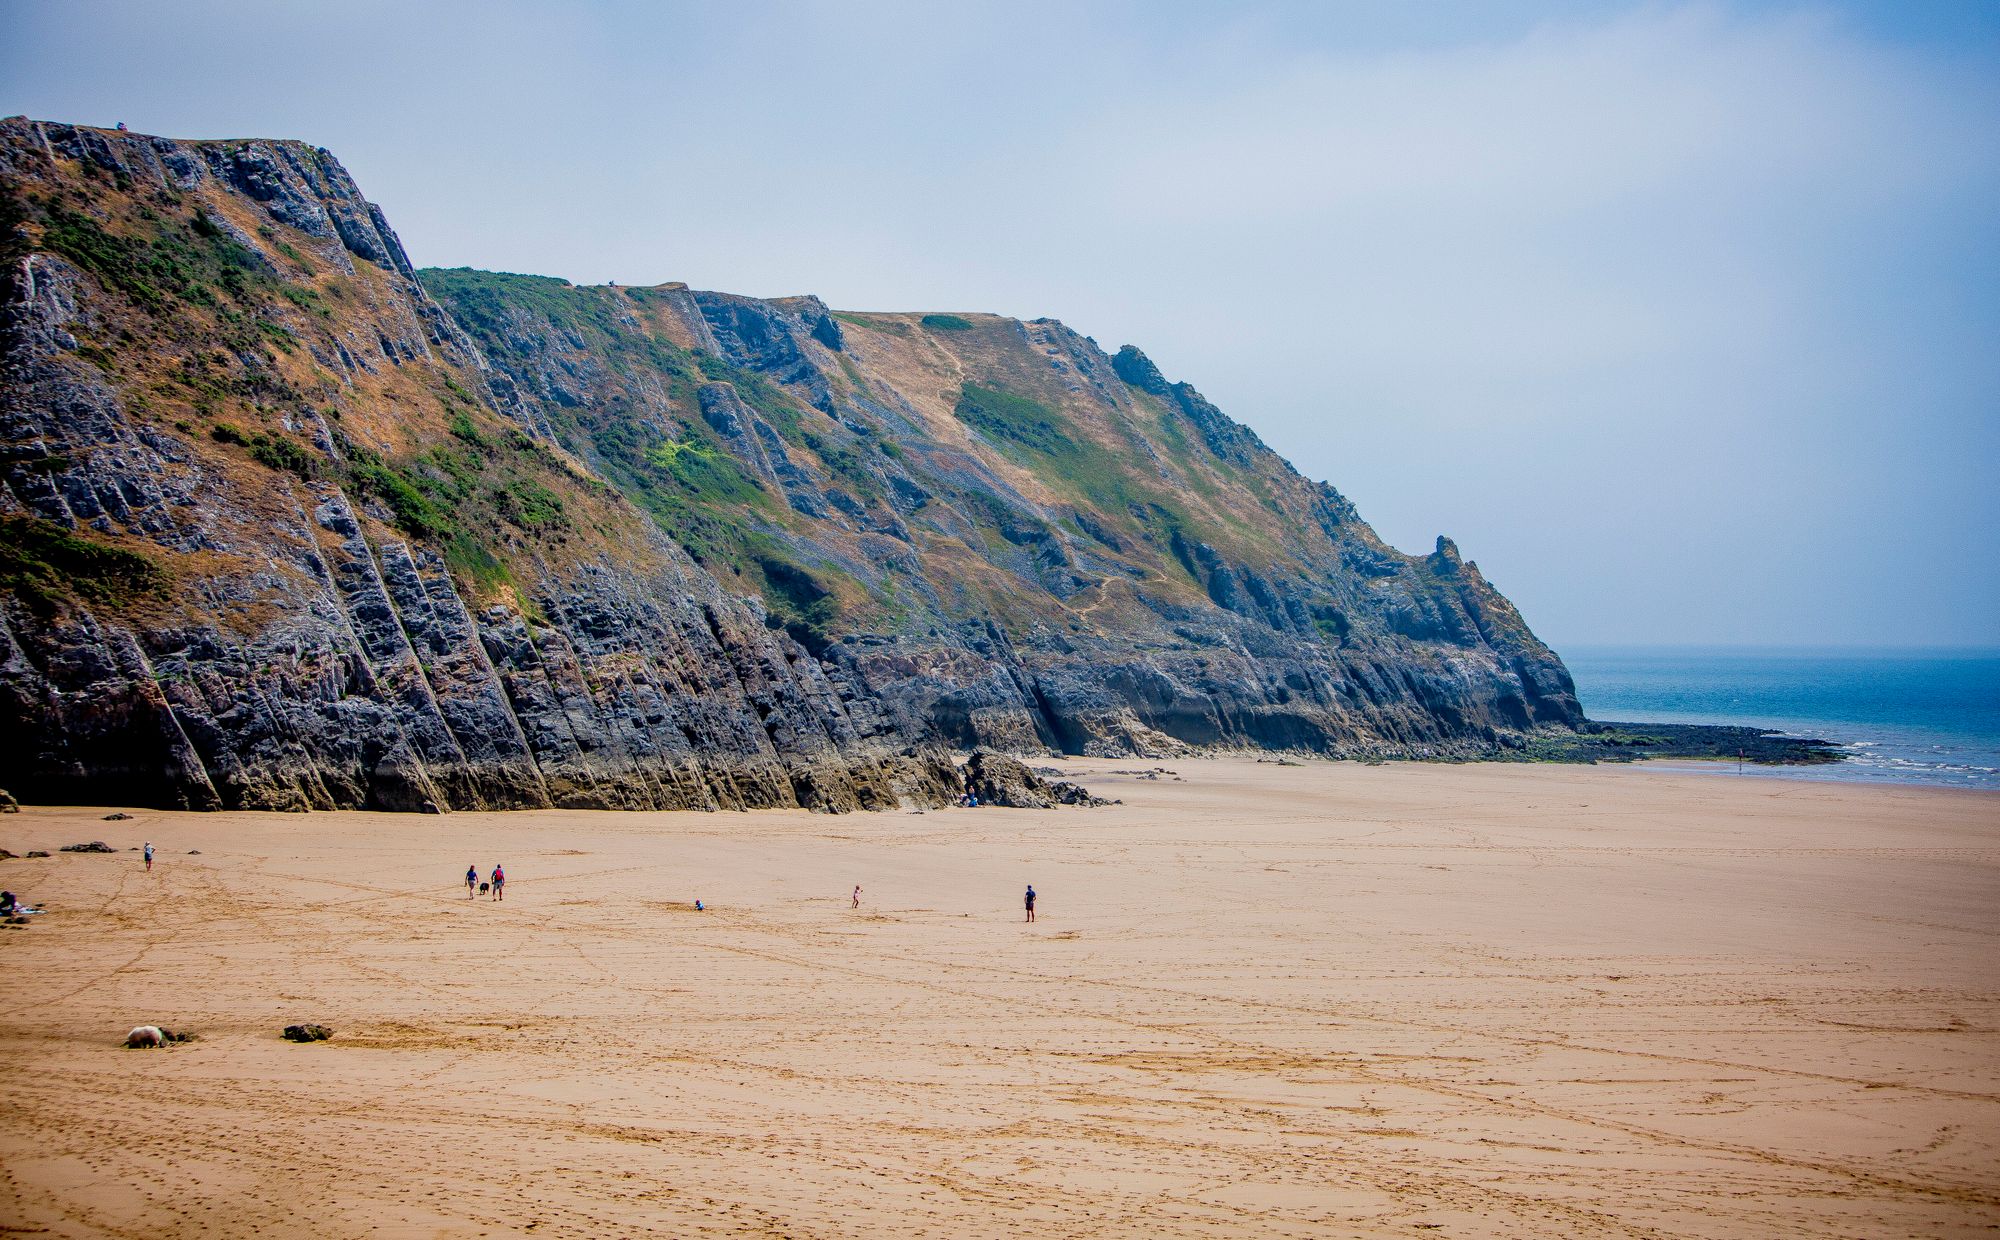 Gower Peninsular: 5 Things Not To Miss